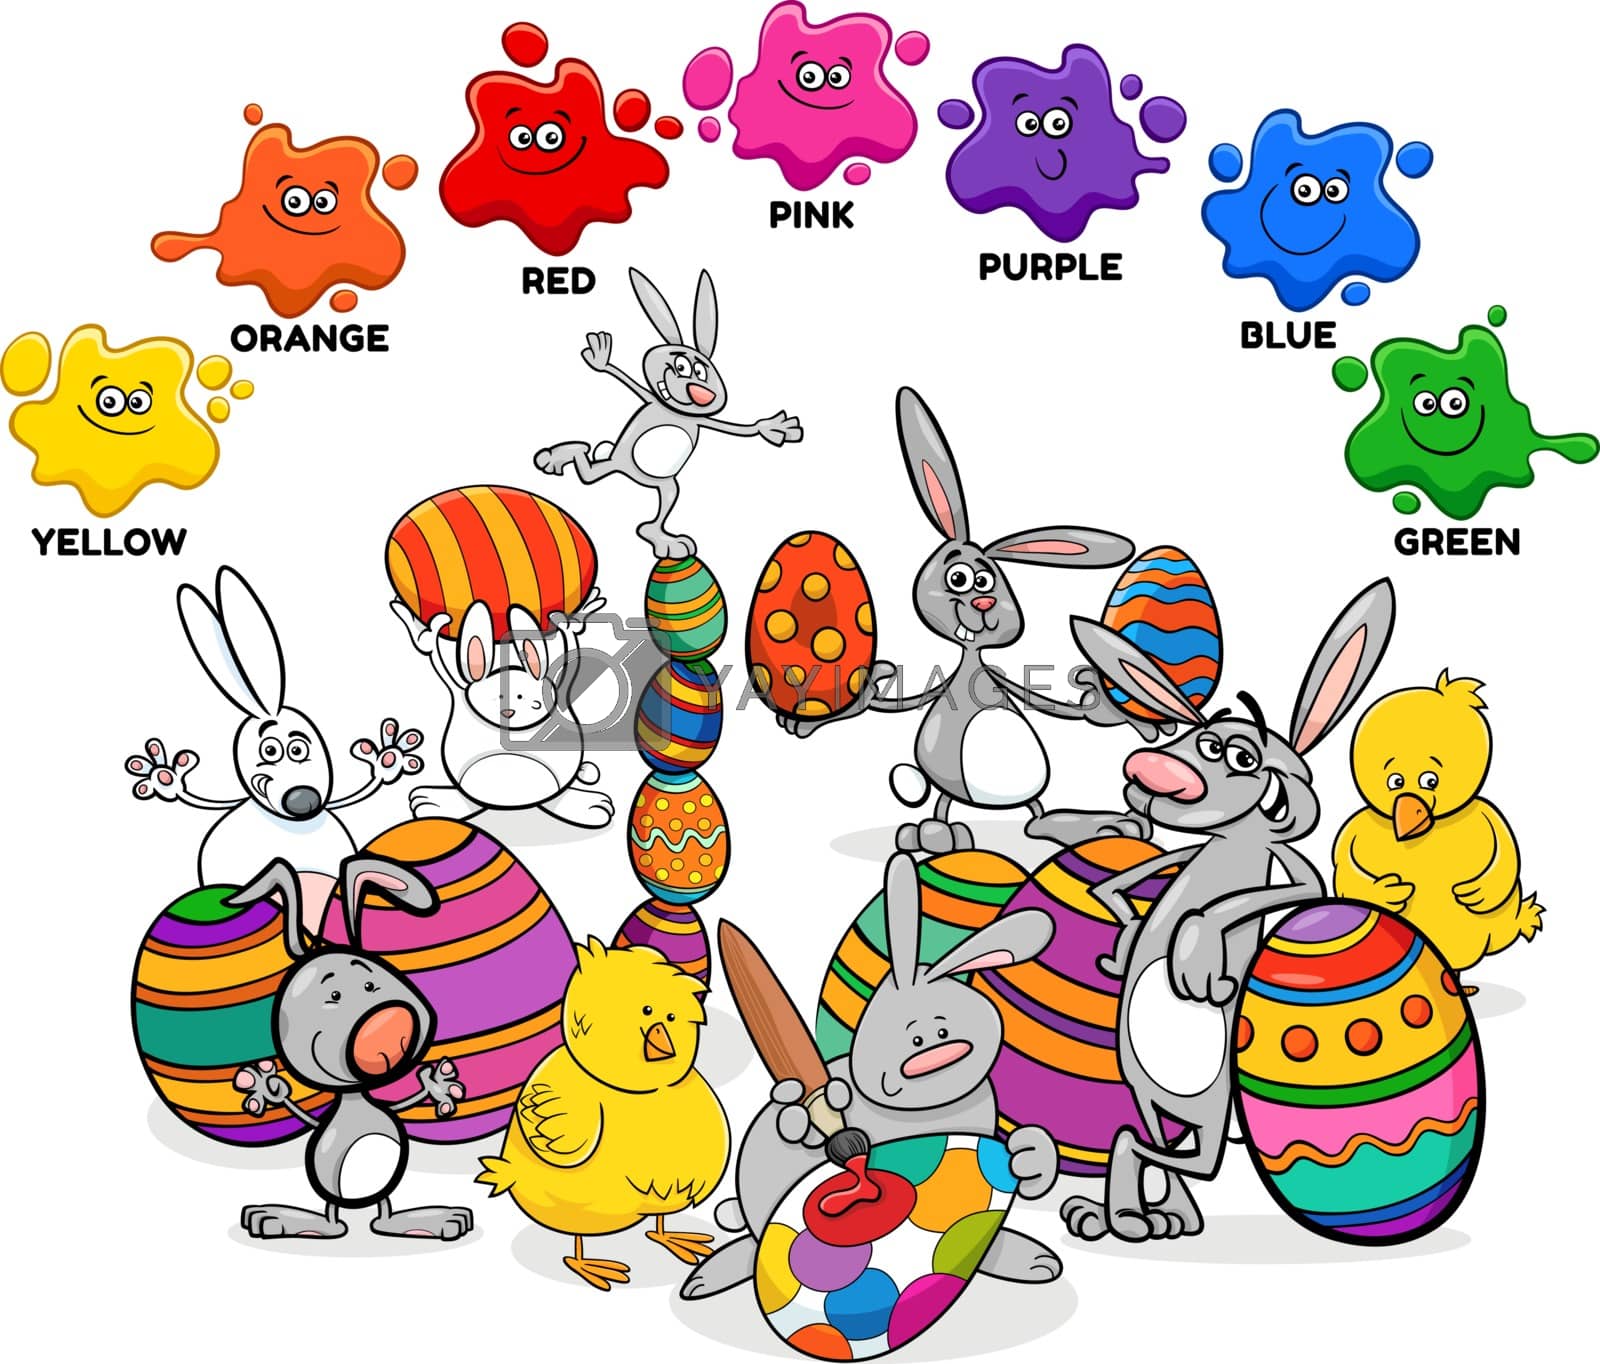 Royalty free image of basic colors with Easter characters group by izakowski